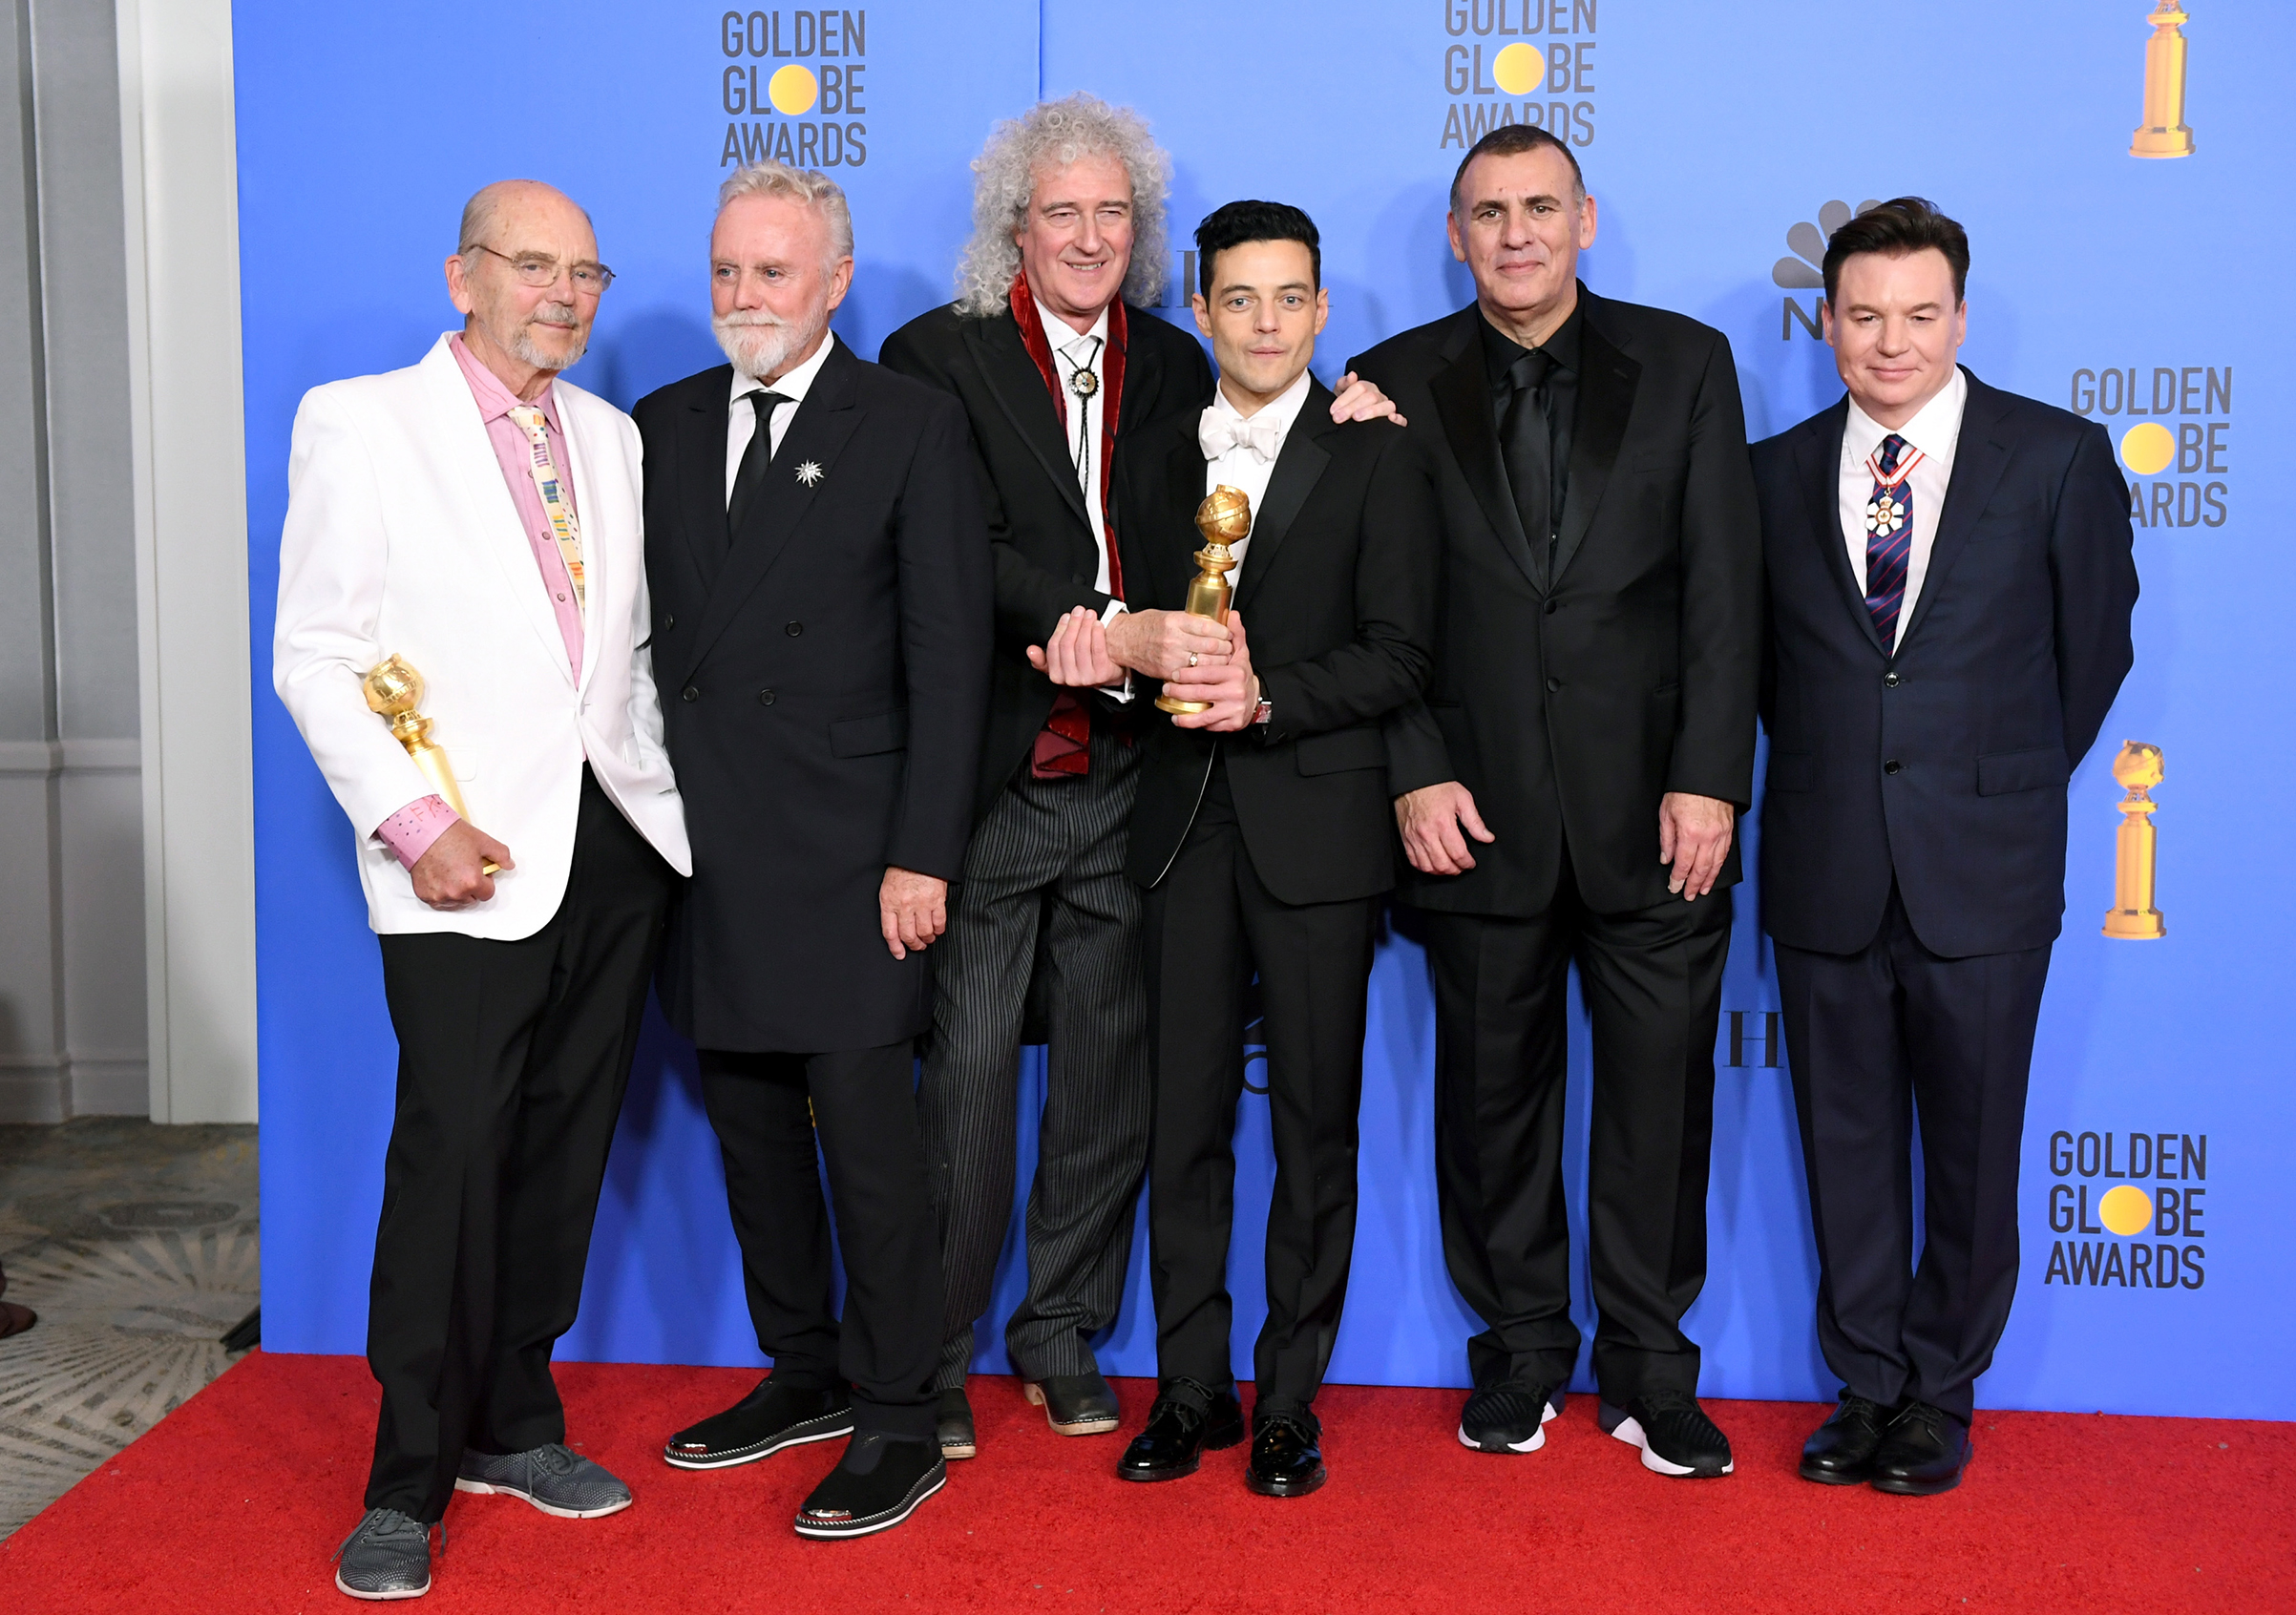 Jim Beach, Roger Taylor and Brian May of Queen, Best Actor in a Motion Picture Drama for 'Bohemian Rhapsody' winner Rami Malek, Producer Graham King, and Mike Myers pose in the press room during the 76th Annual Golden Globe Awards on Jan. 6, 2019 in Beverly Hills. (Kevin Winter—Getty Images)